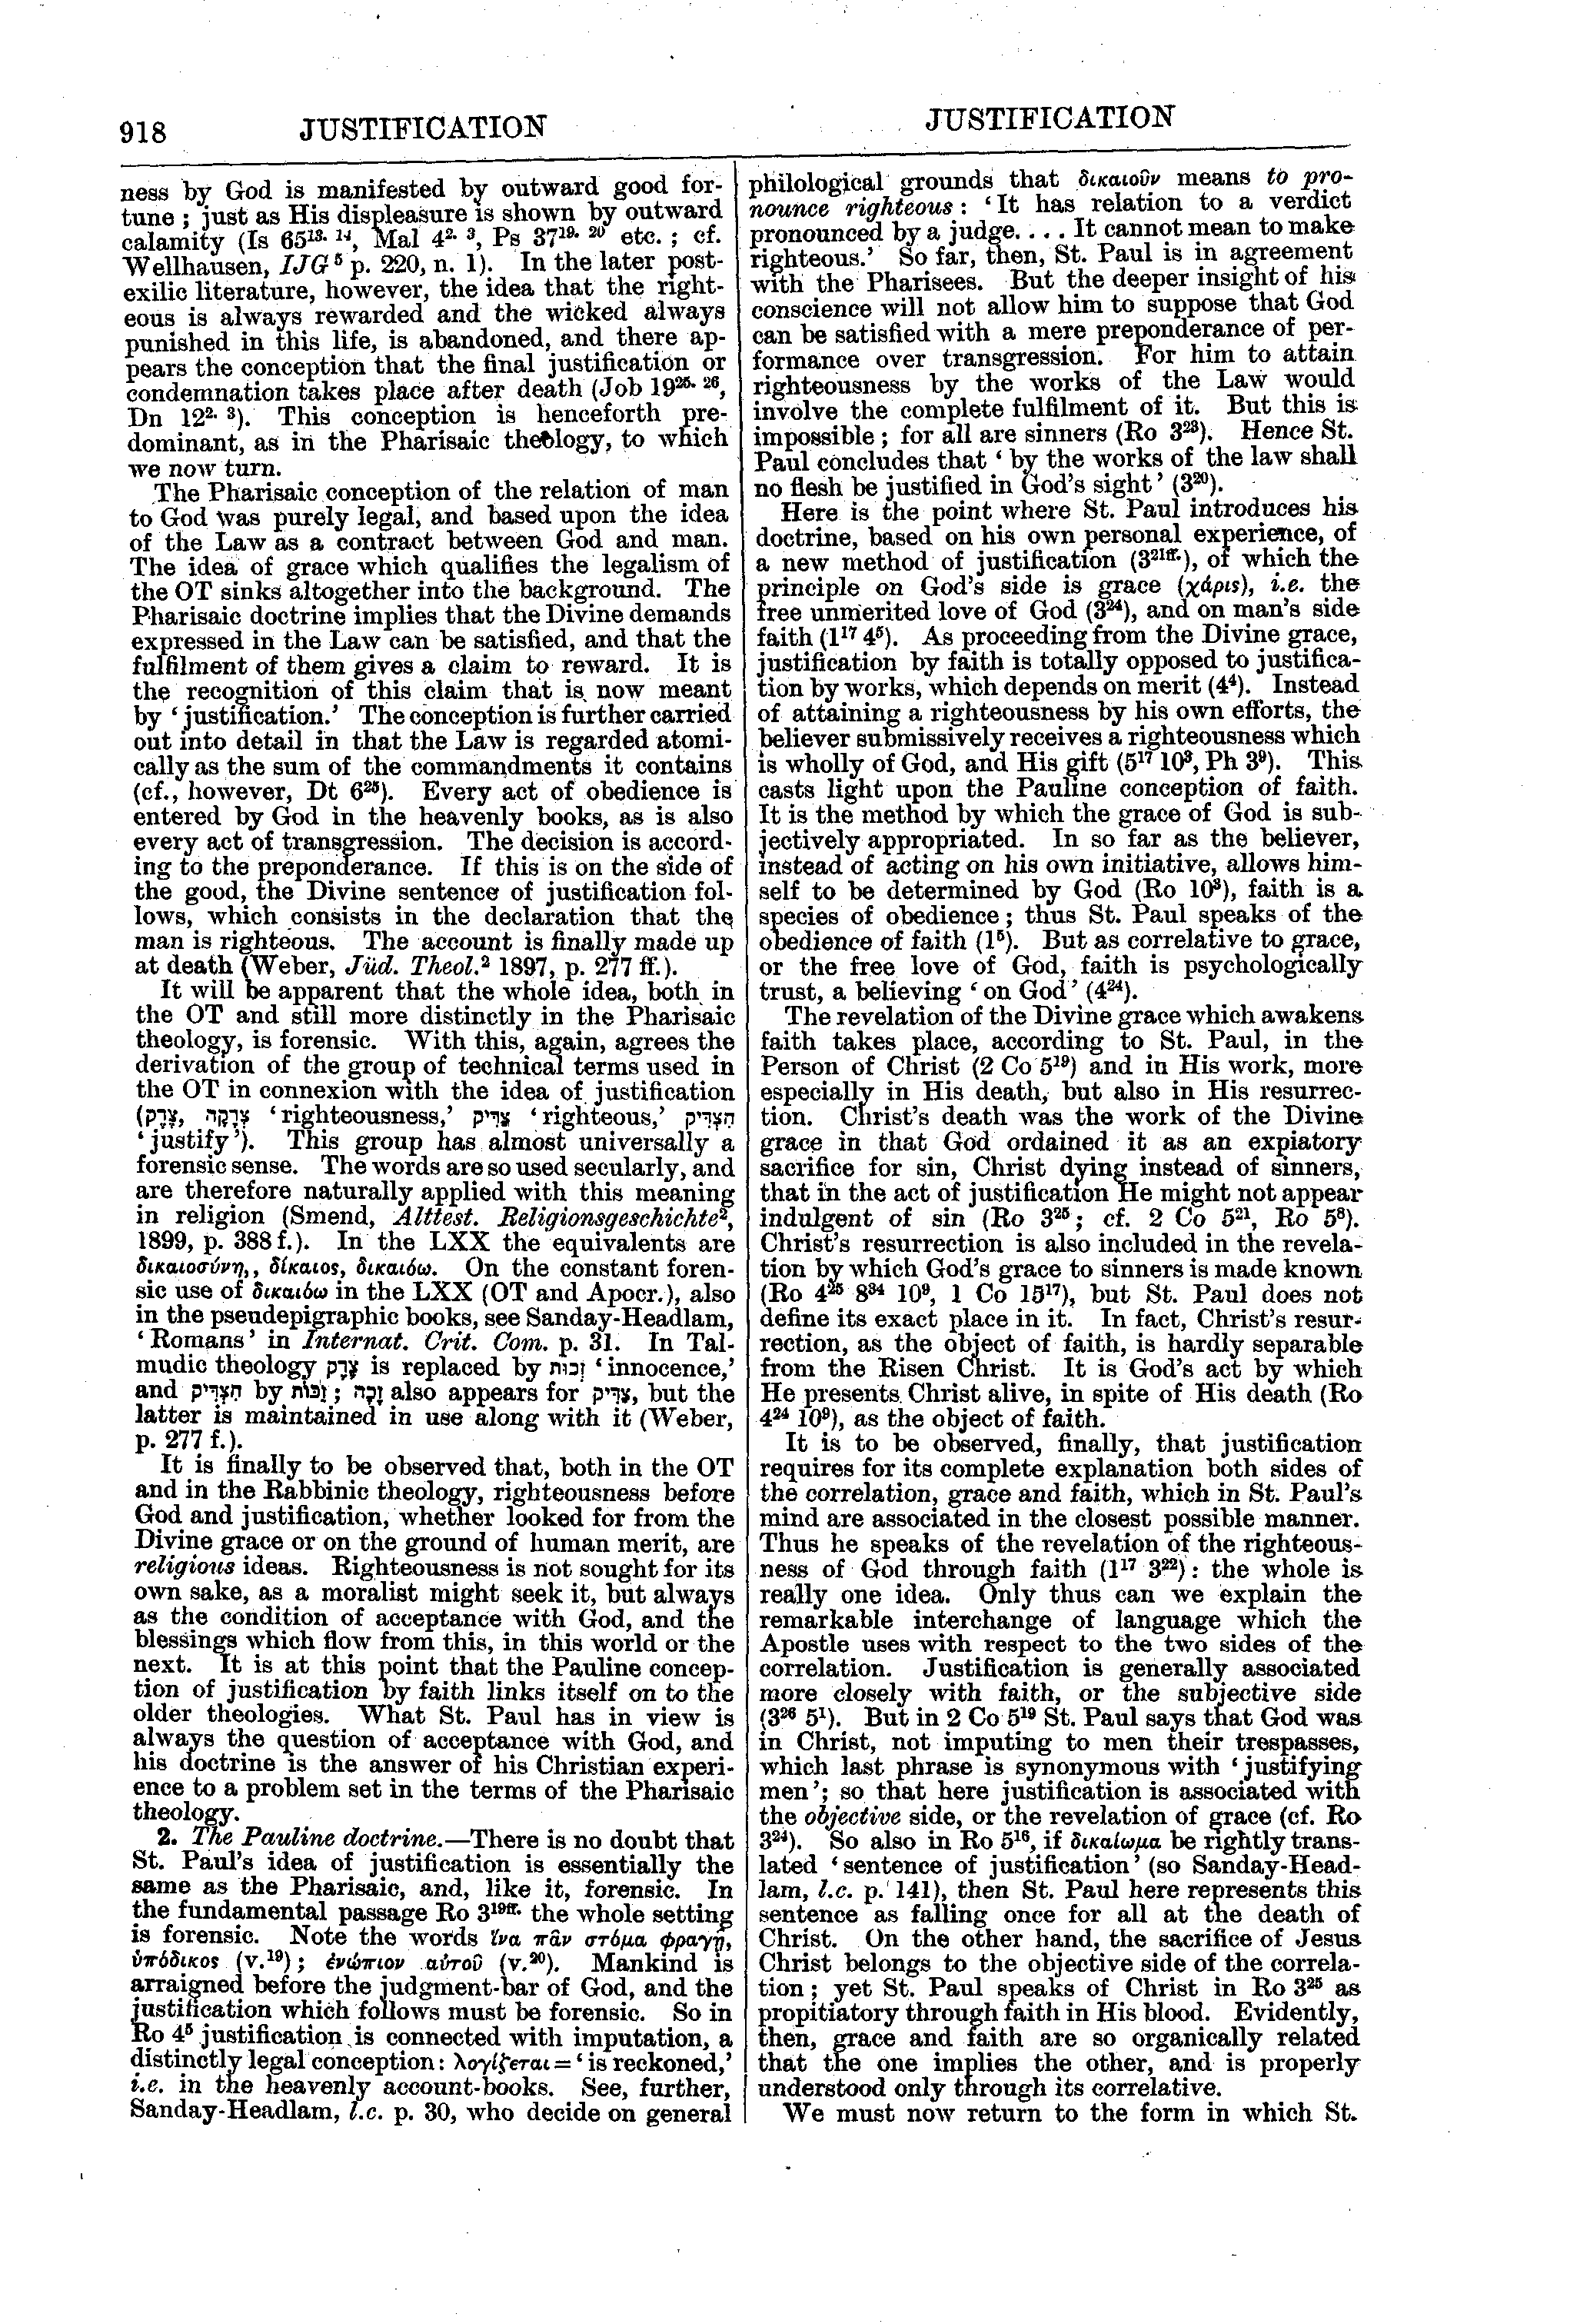 Image of page 918